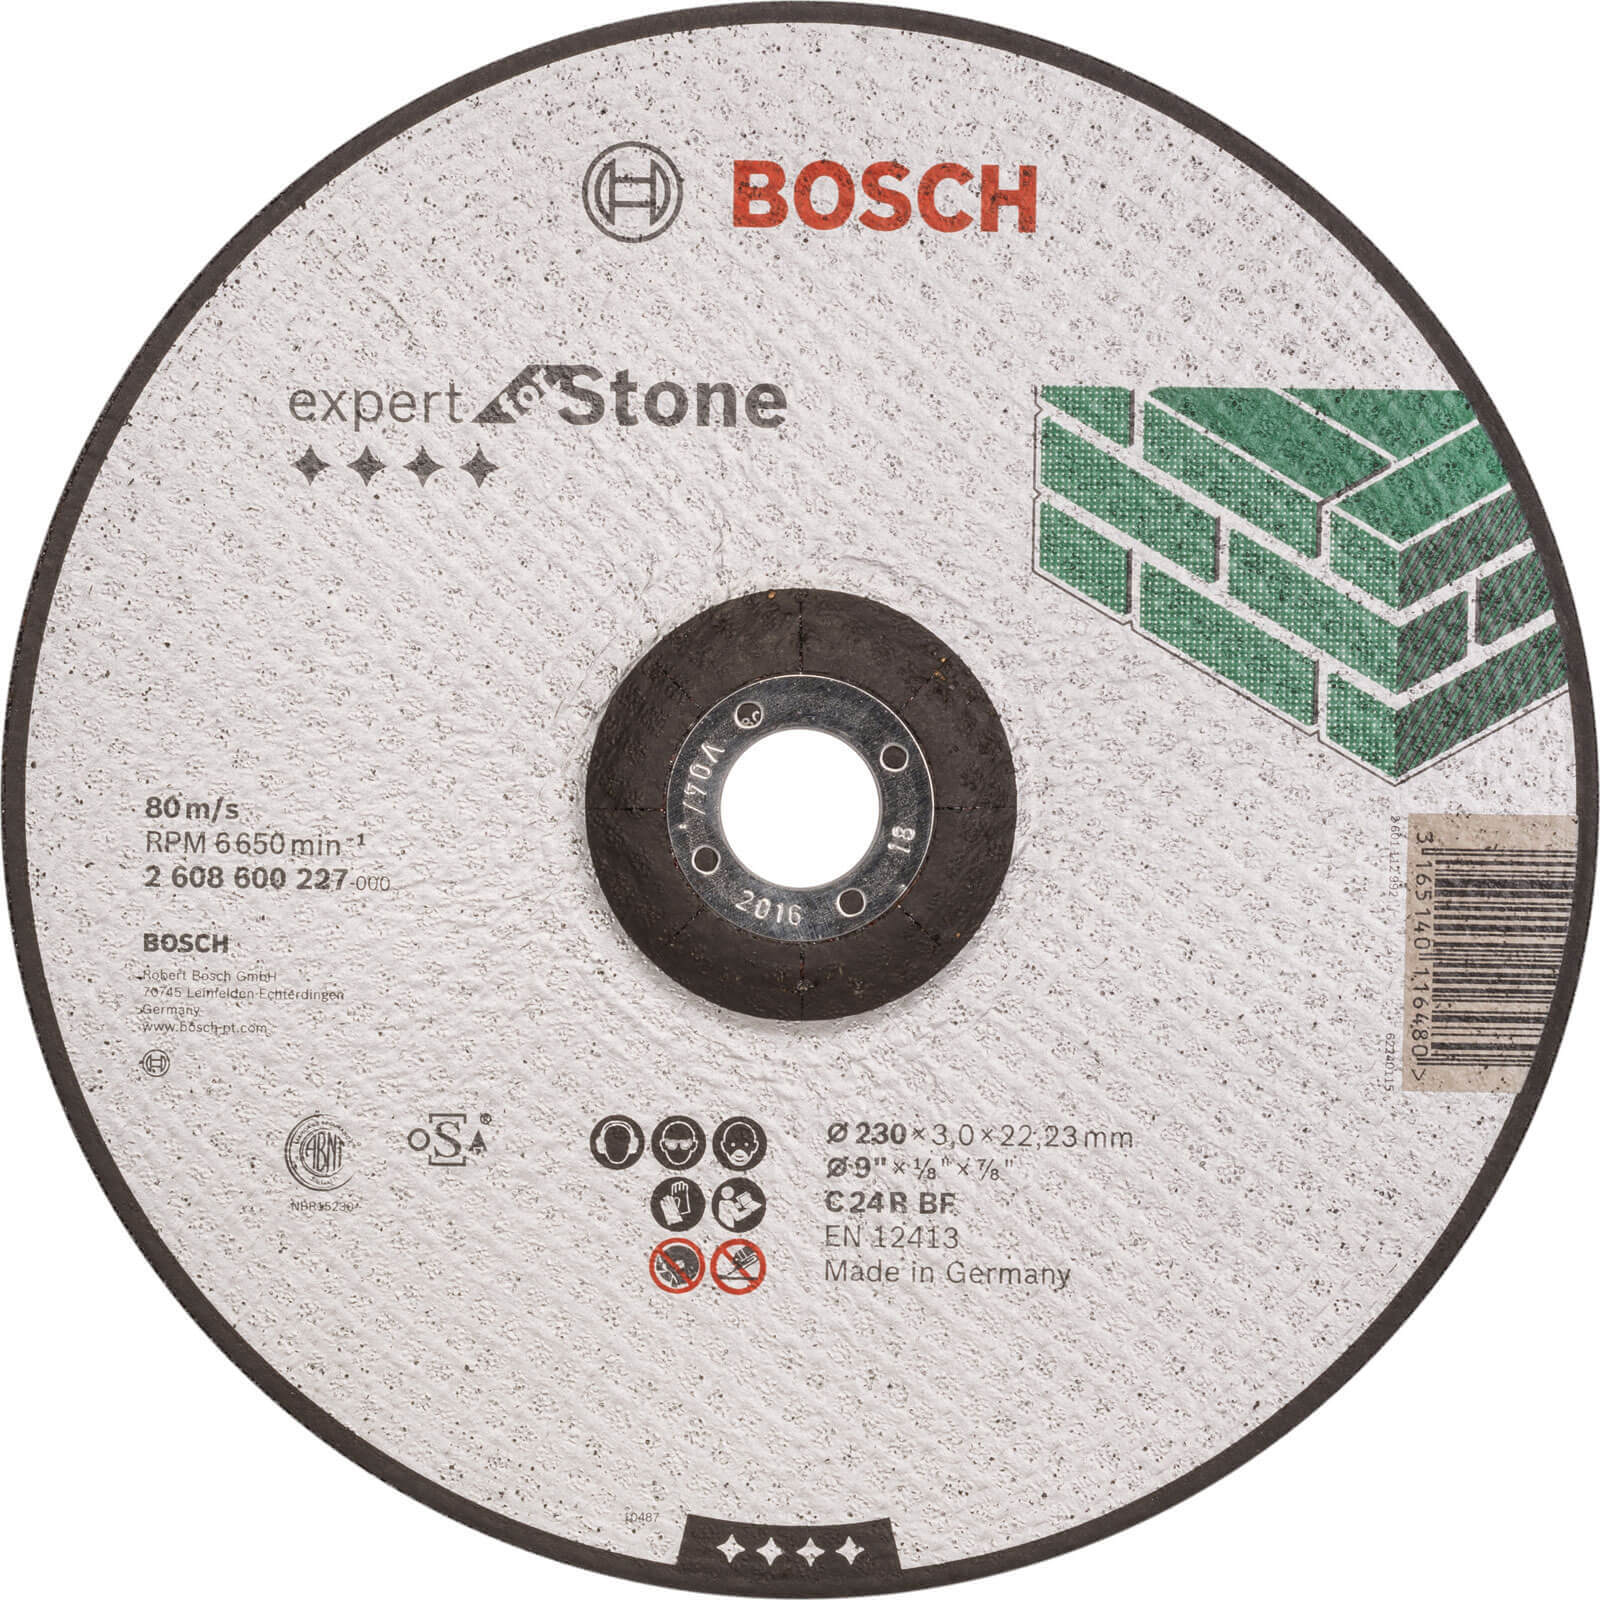 Image of Bosch C24R BF Depressed Stone Cutting Disc 230mm